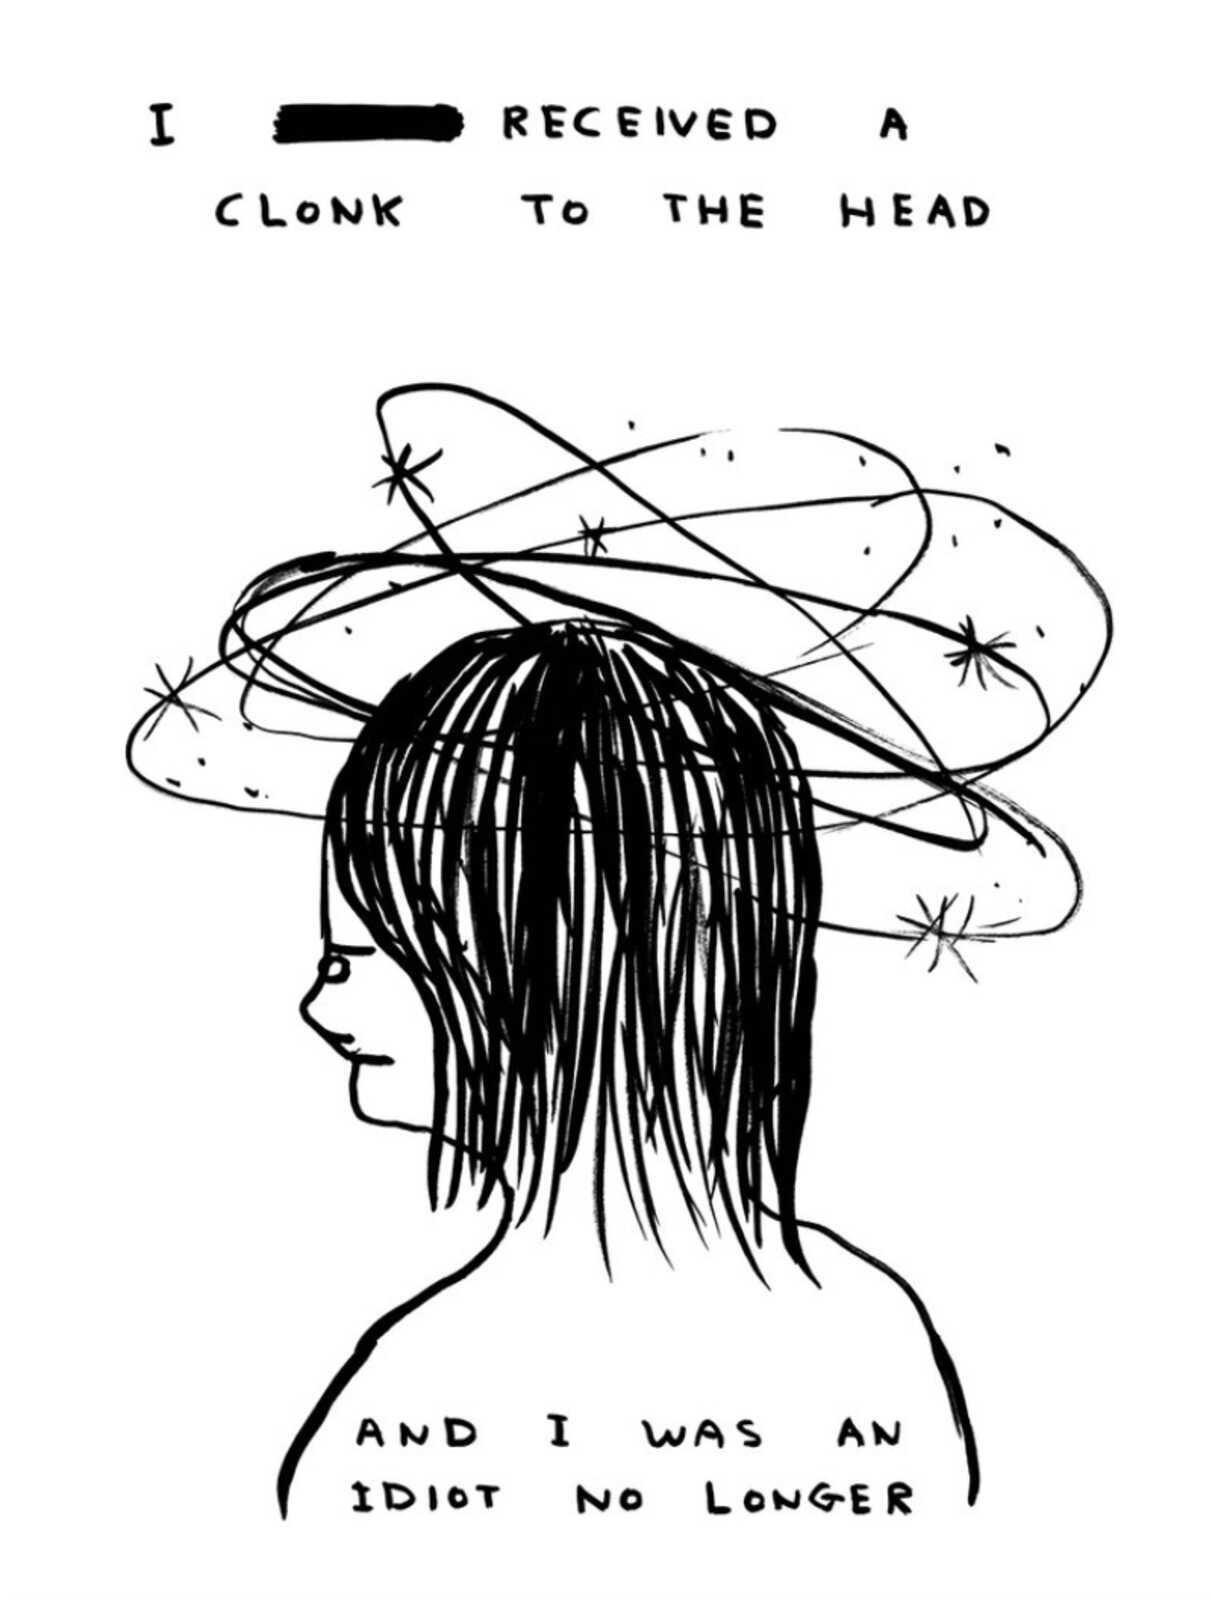 I Received A Clonk To The Head - Art by David Shrigley